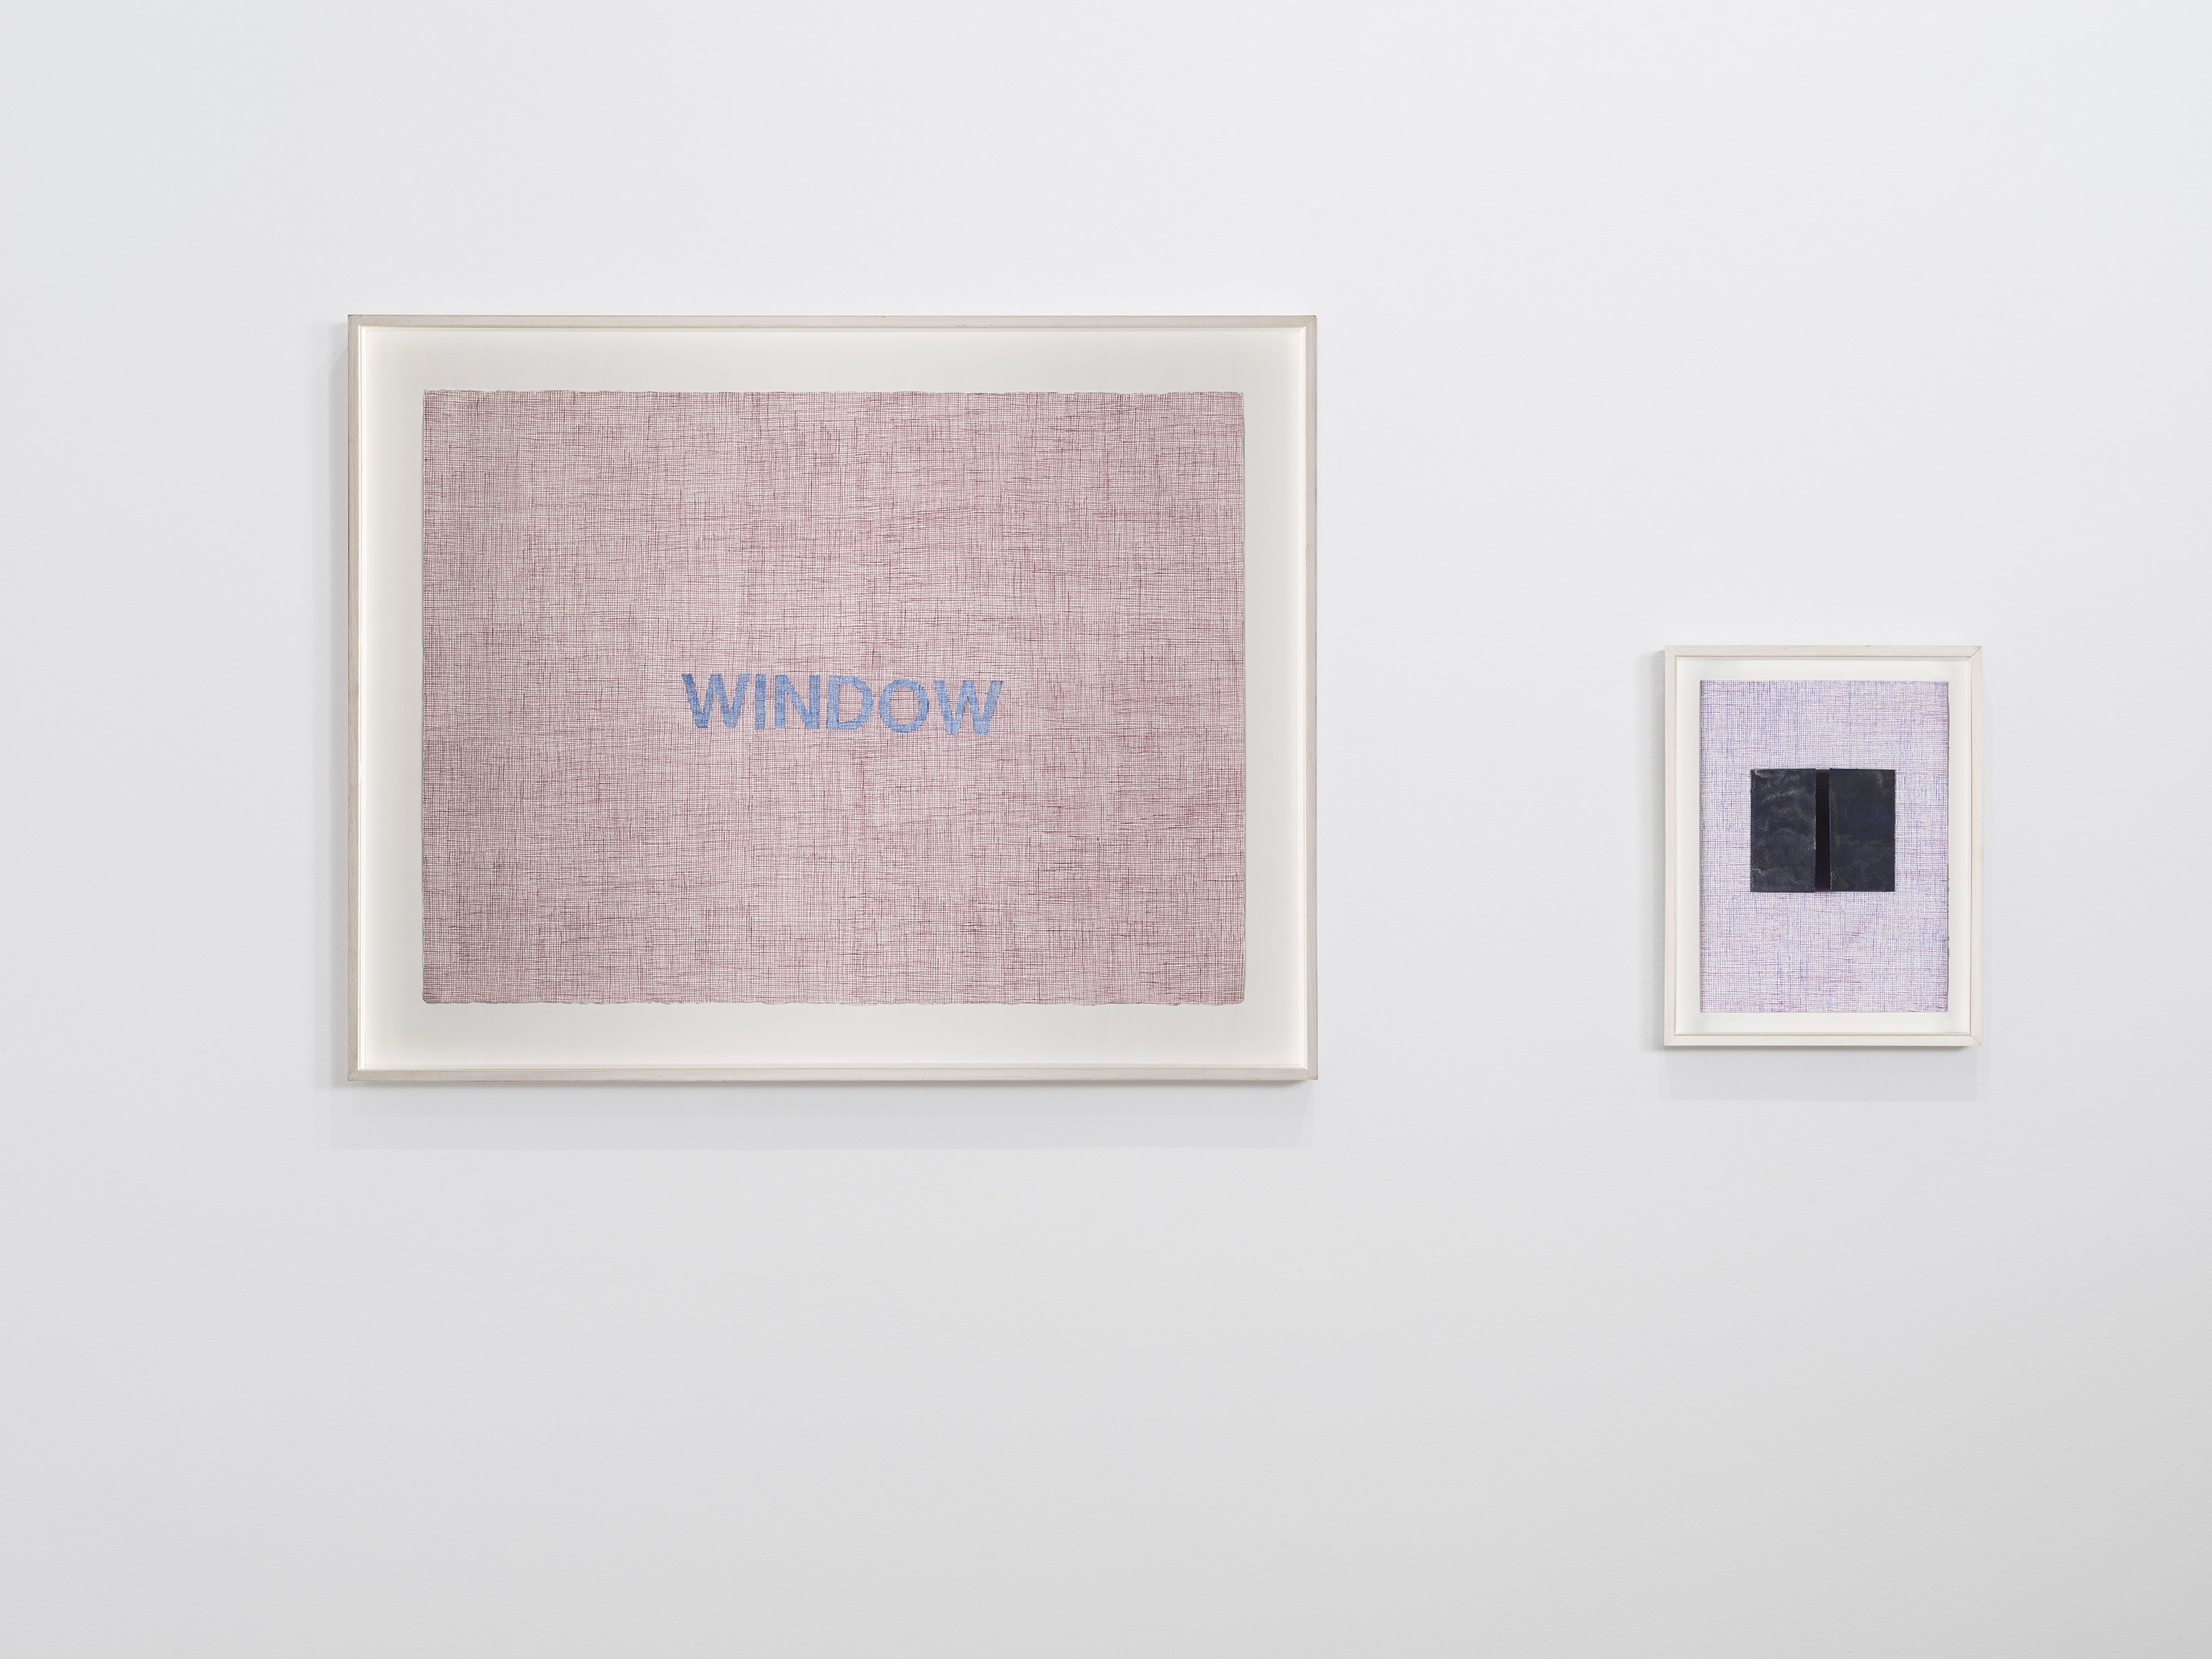 "Window", 2019, Watercolour and collage on paper, left panel: 56 x 76 cm (framed: 71 x 90 cm), right panel: 31 x 23 cm (framed: 37 x 29,5 cm)